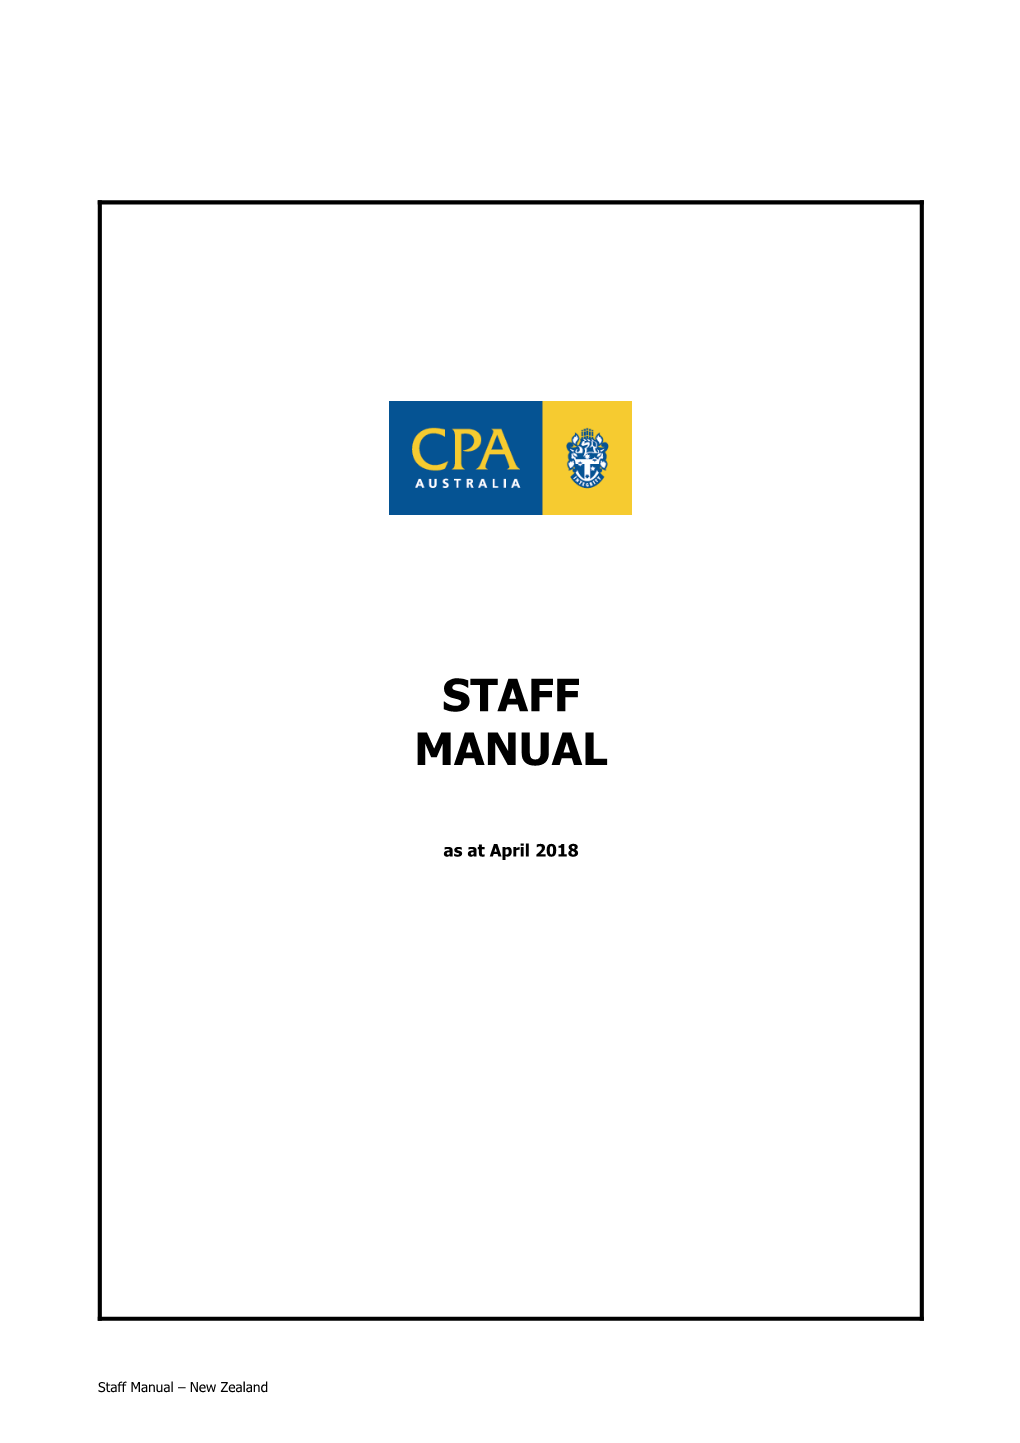 Staff Manual for New Zealand Firms